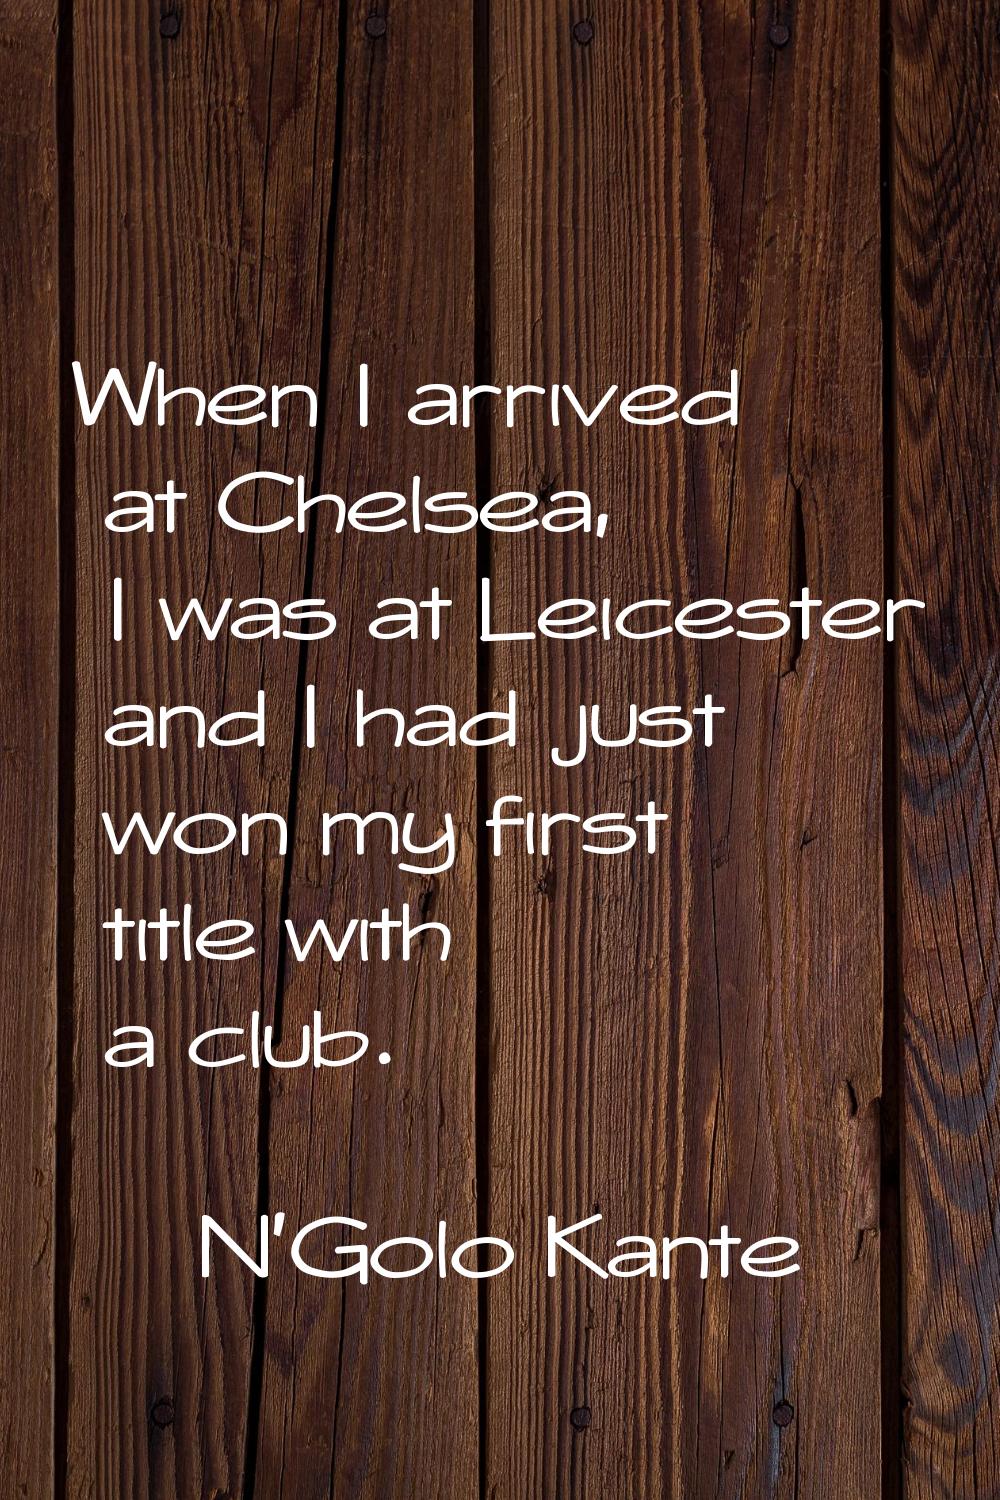 When I arrived at Chelsea, I was at Leicester and I had just won my first title with a club.